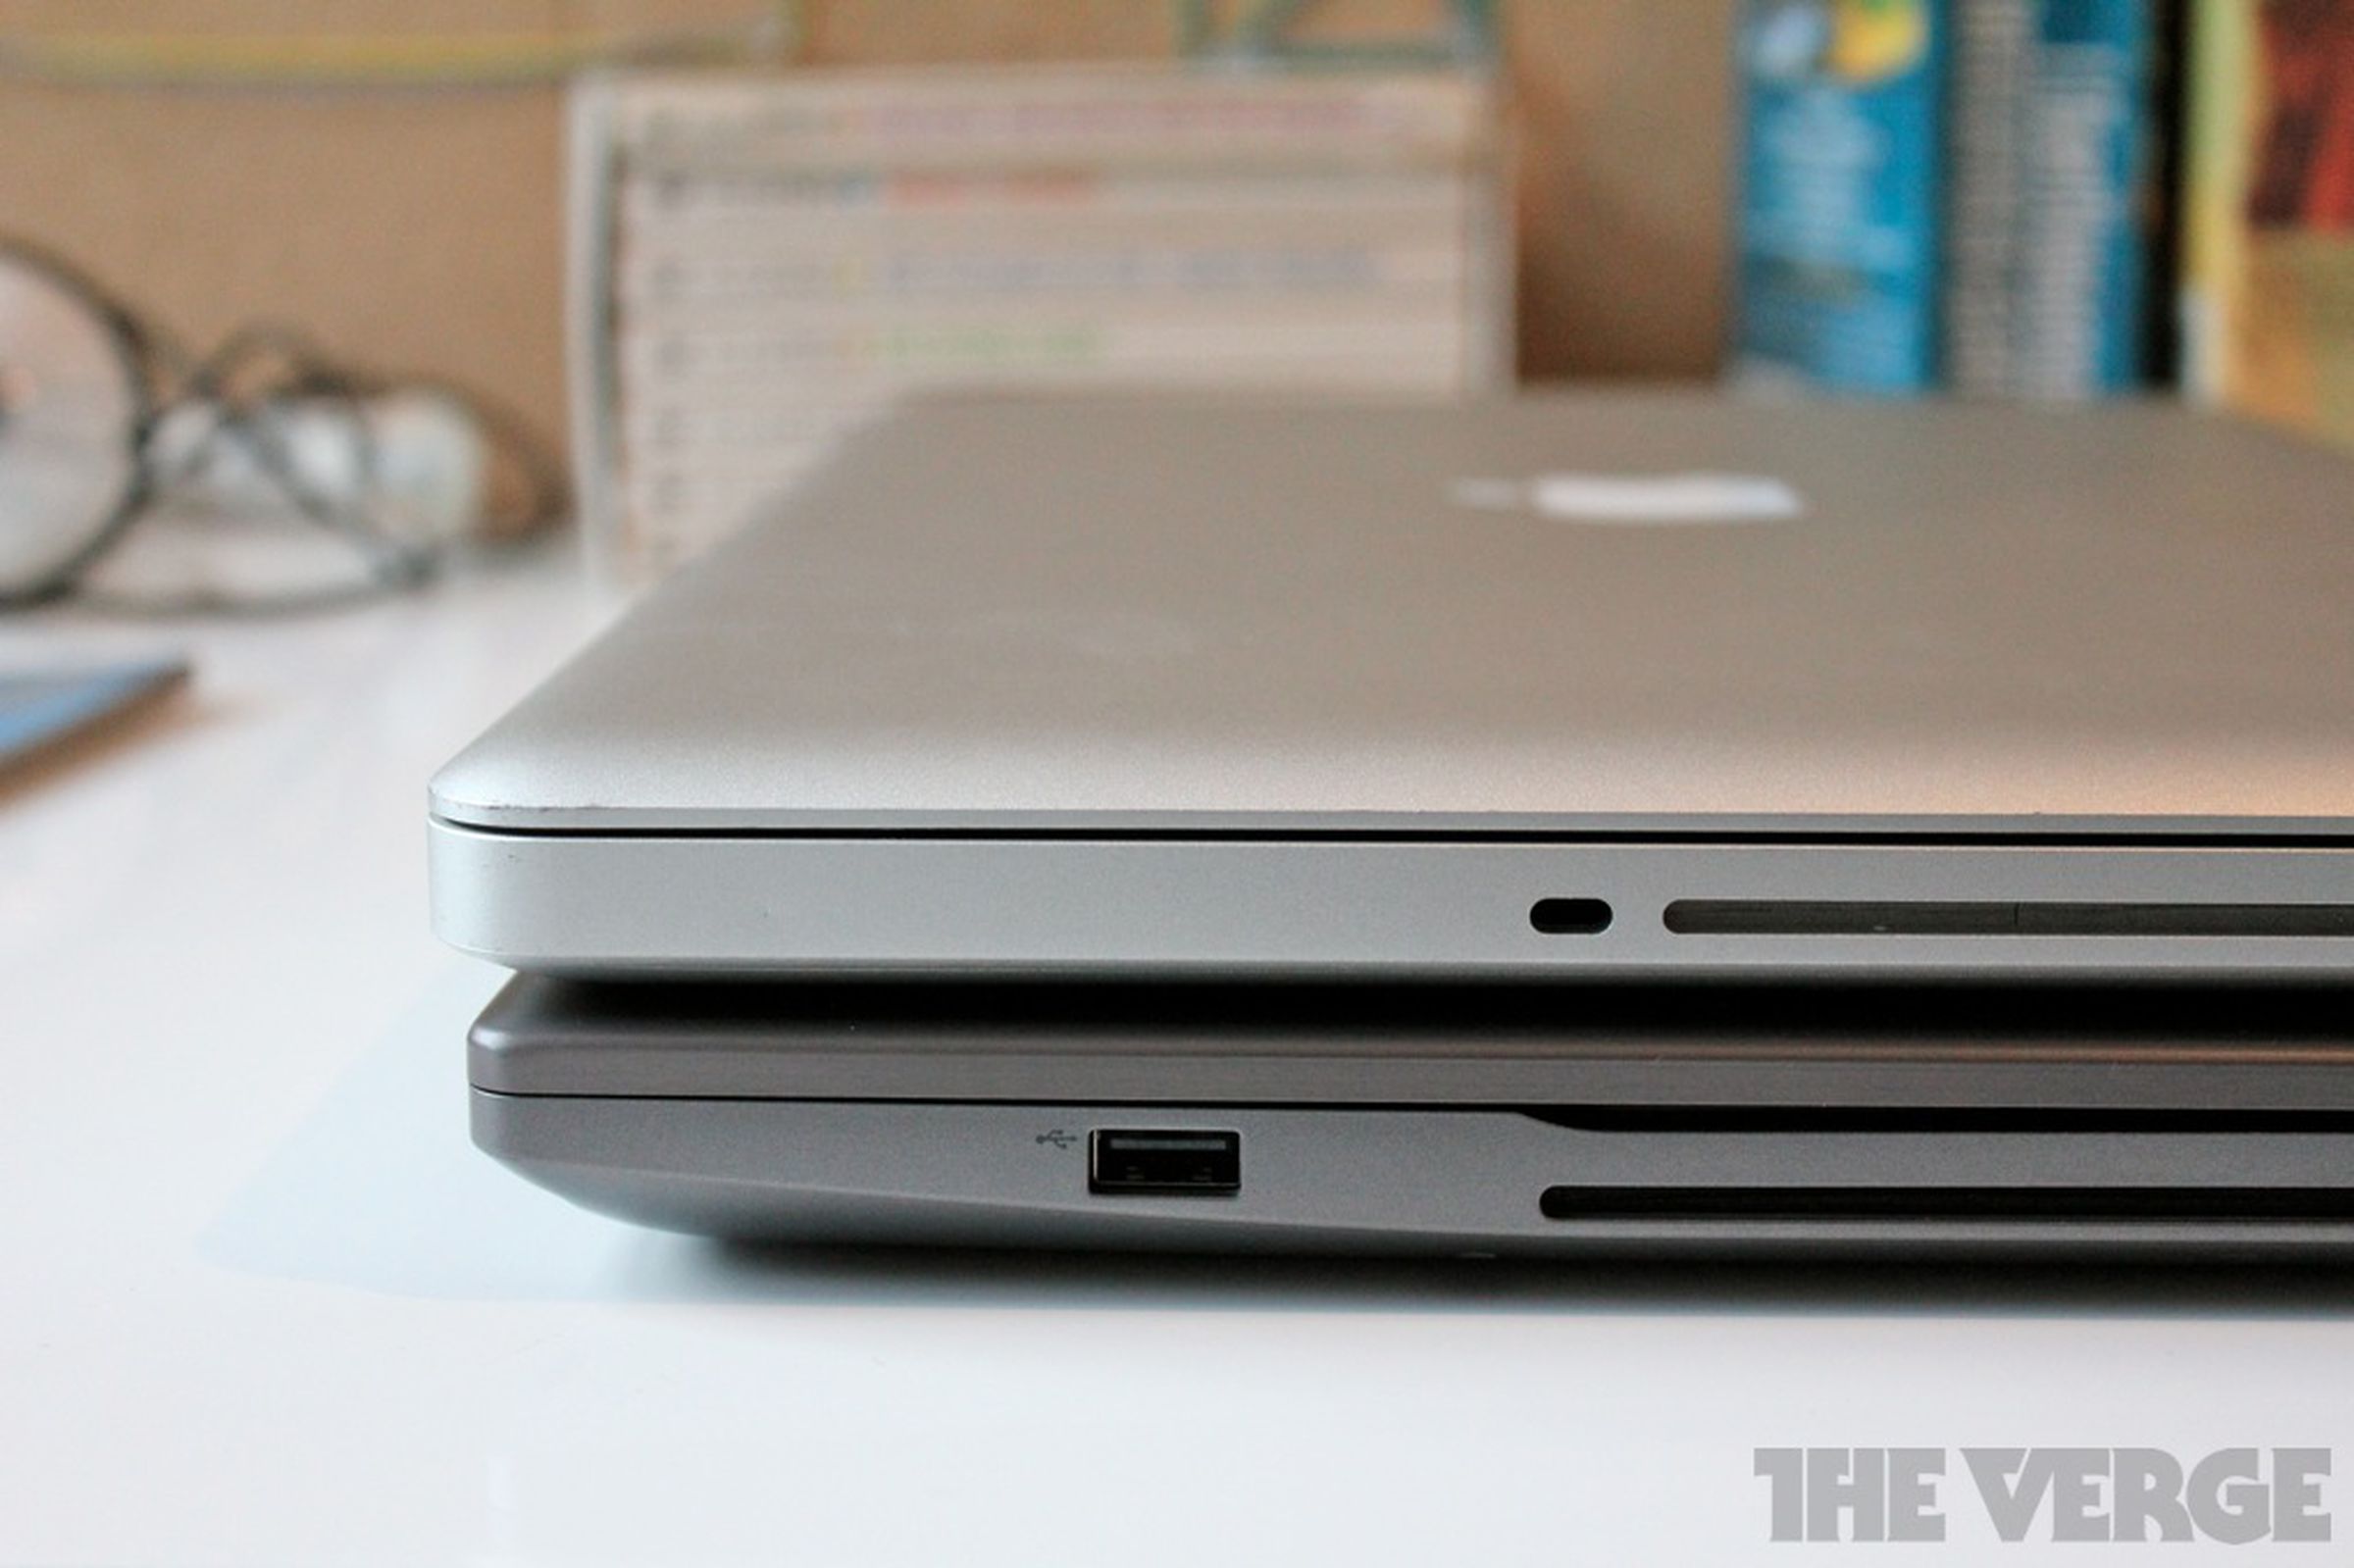 Samsung Series 7 Chronos laptop review pictures